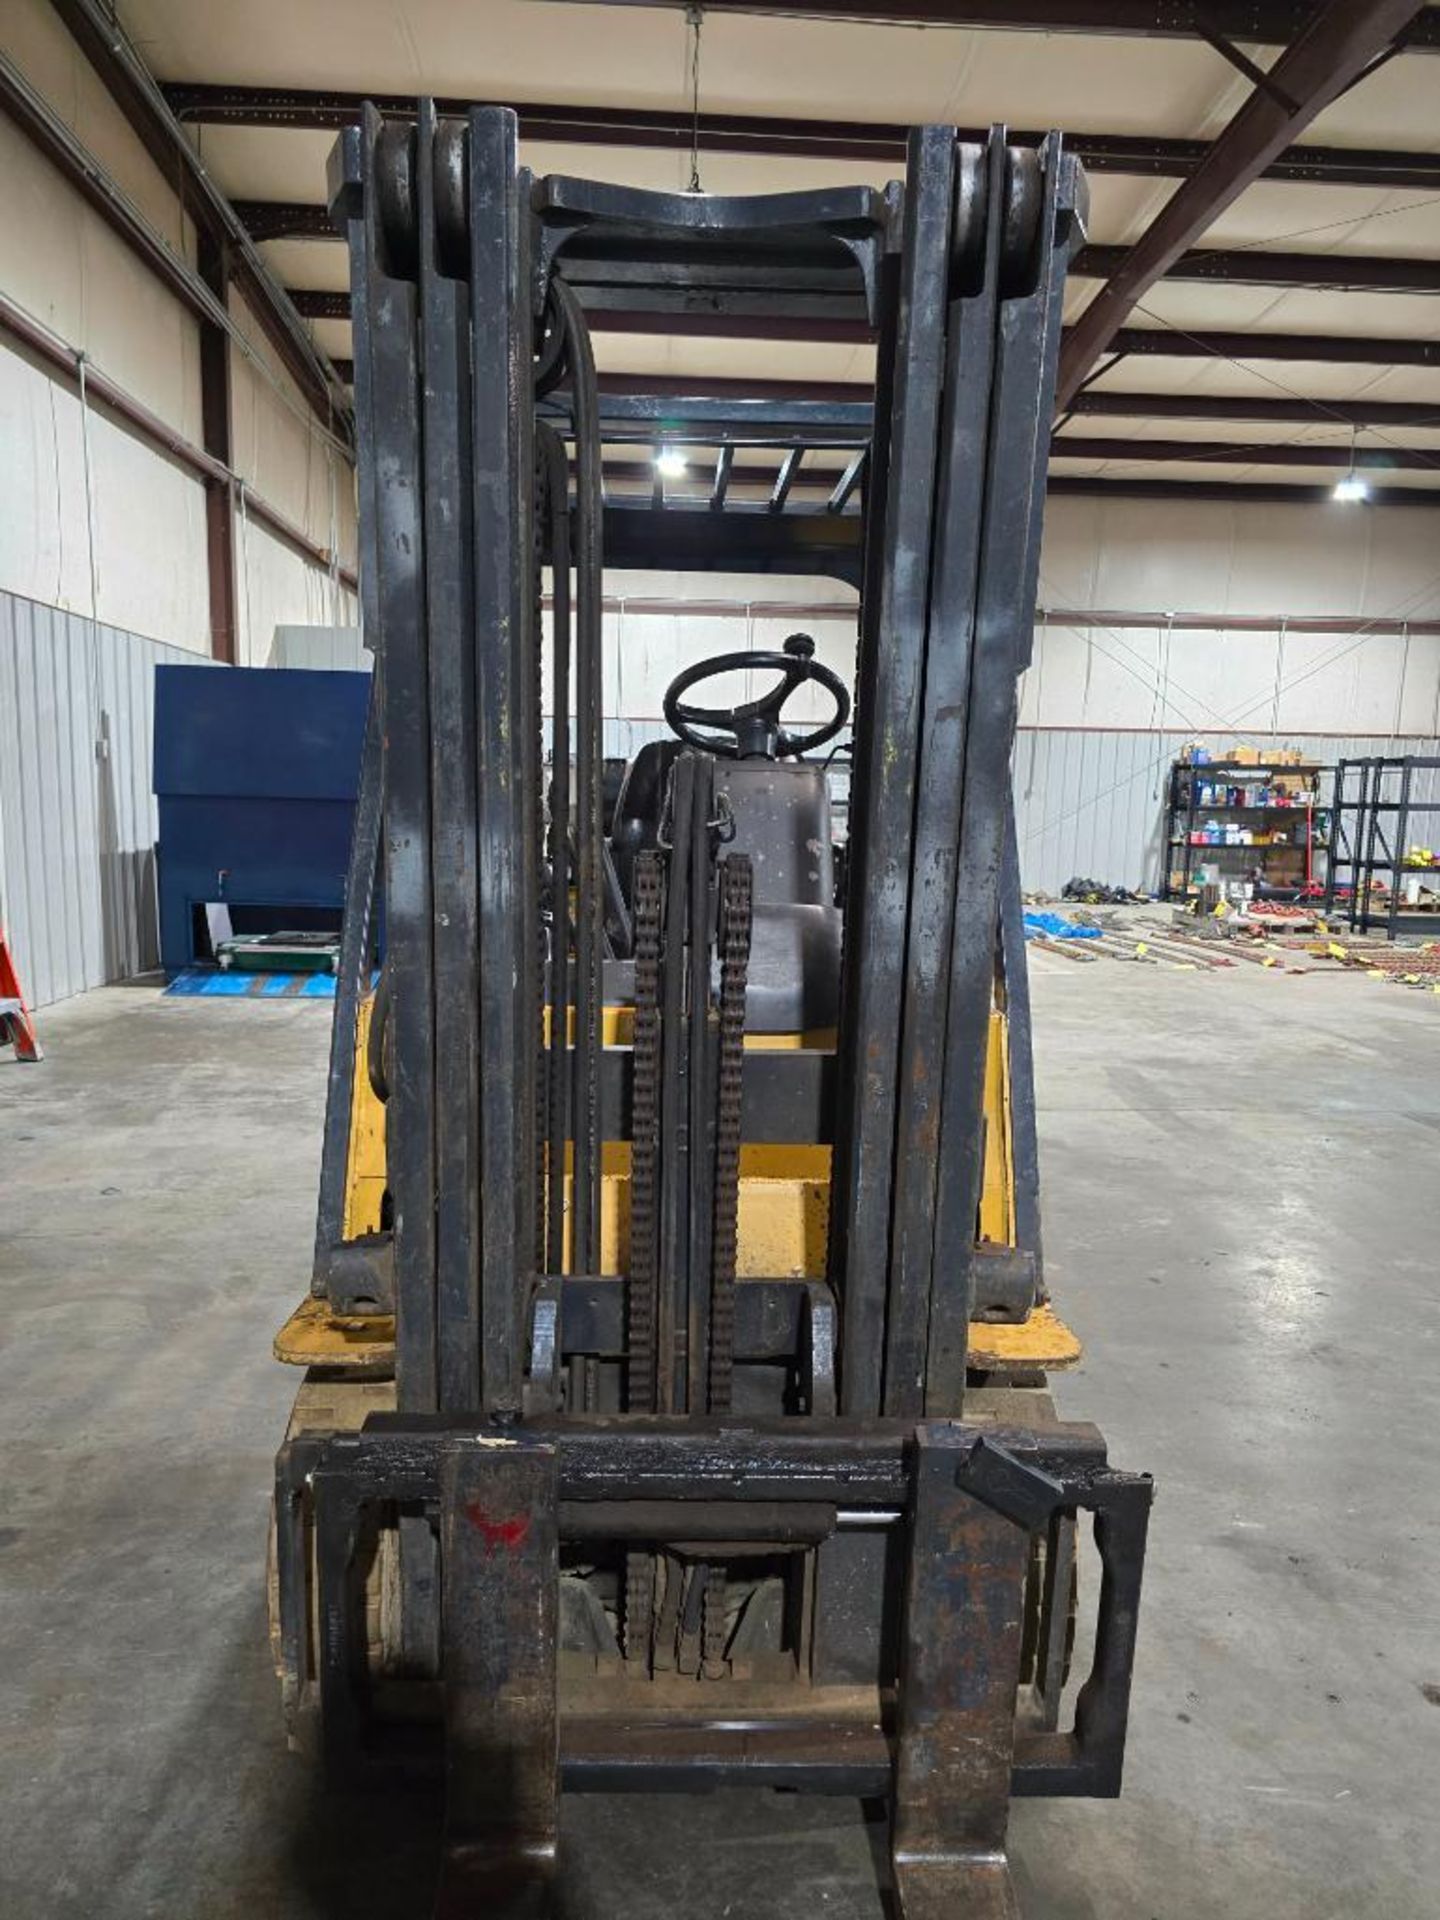 Caterpillar 5,000-LB. Capacity Forklift, Model CG25, LPG, 3,000 Hours, 188" Lift Height, S/N AT82001 - Image 5 of 12